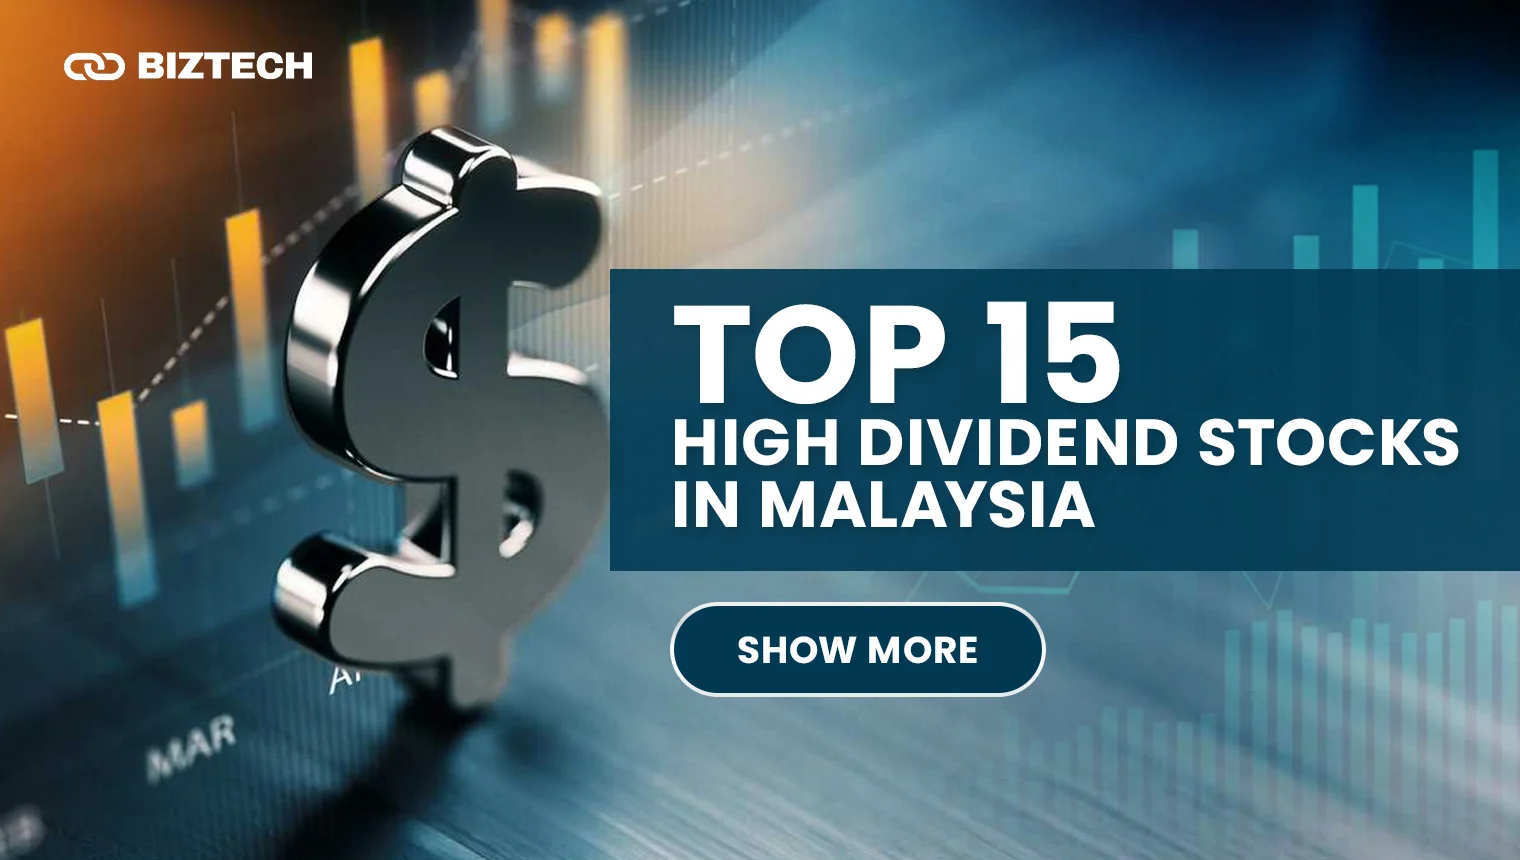 Top 15 High Dividend Stocks in Malaysia